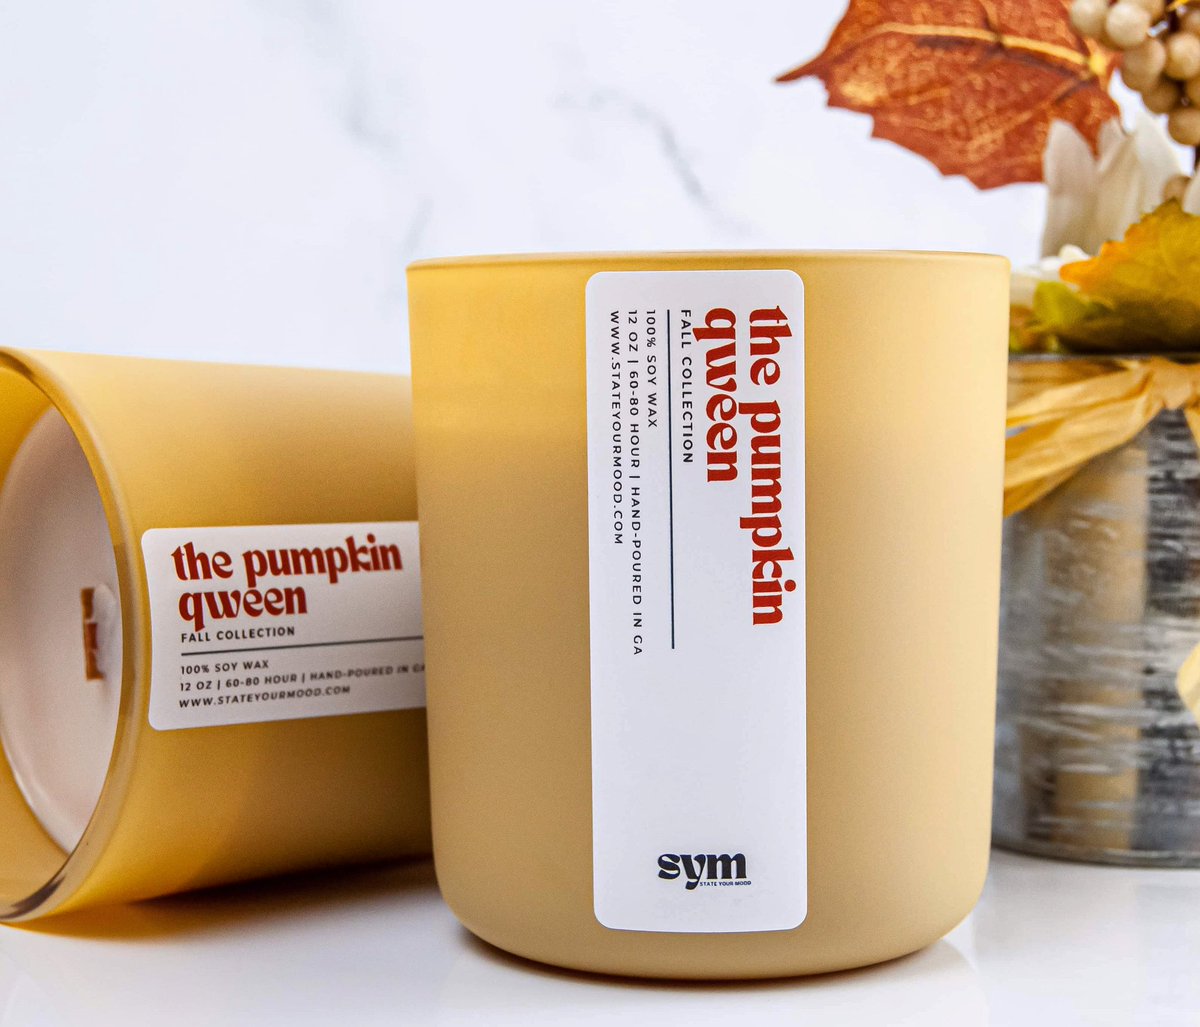 The perfect scent for your home this Fall! The Pumpkin Qween creates a chic, autumnal vibe that is warm and welcoming 😌

So what are you waiting for? Grab this limited-edition scent while it last!

#stateyourmood #candles #fallcollection #luxury #newarrival #recyclablepackaging